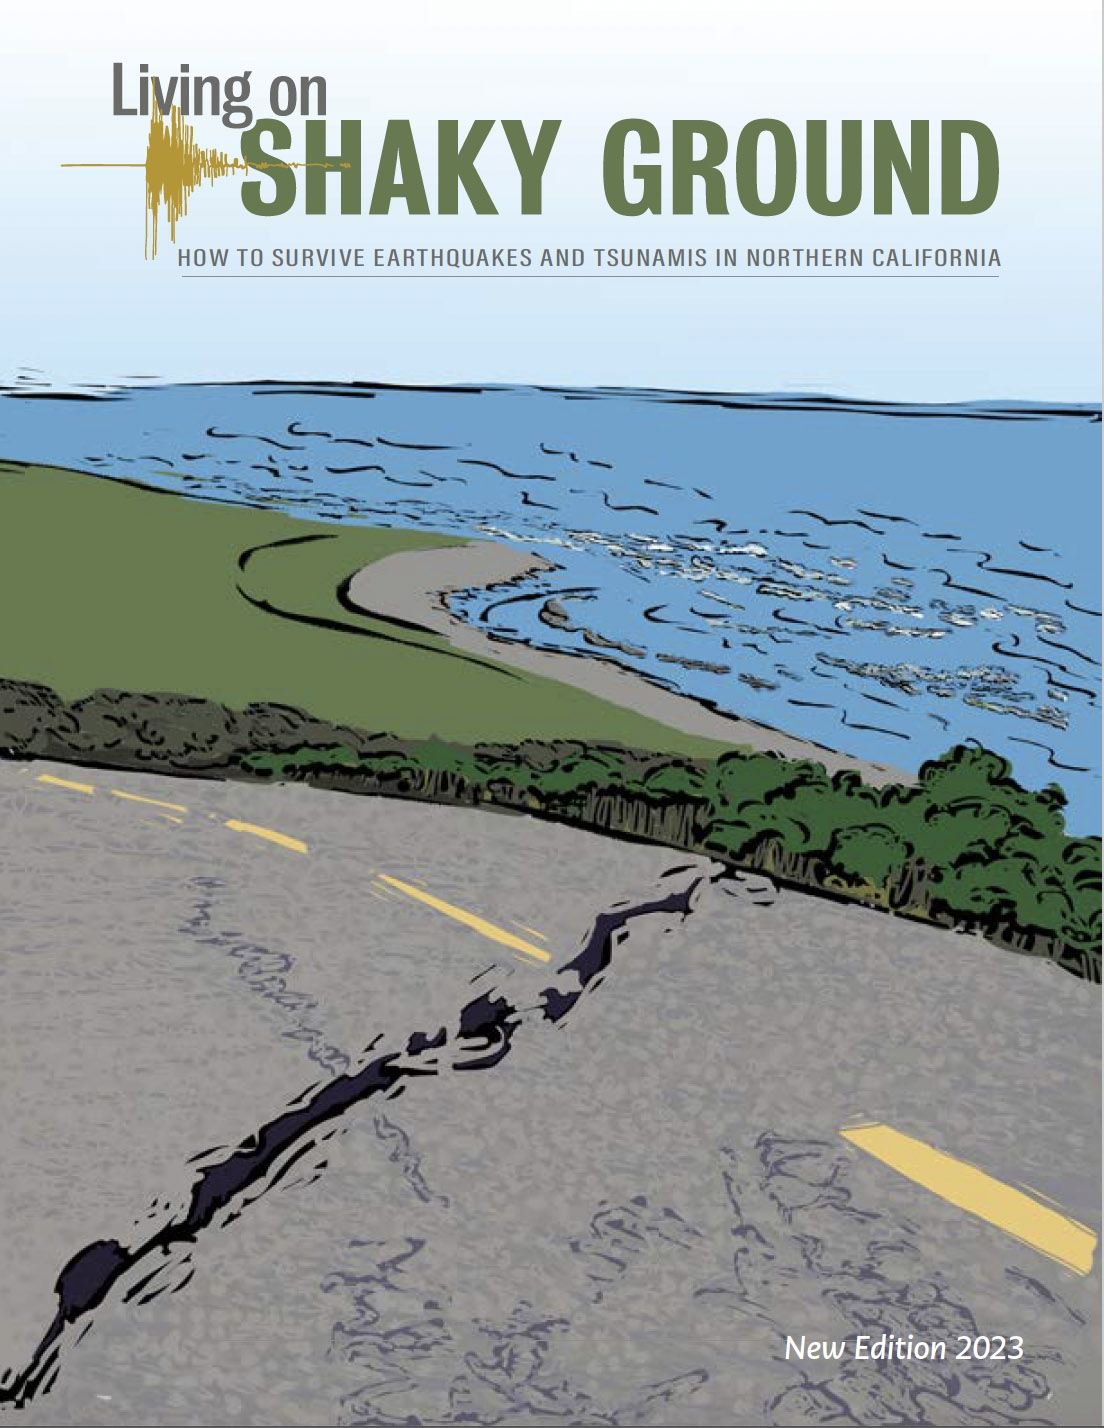 Living on Shaky Ground Cover 2023 edition